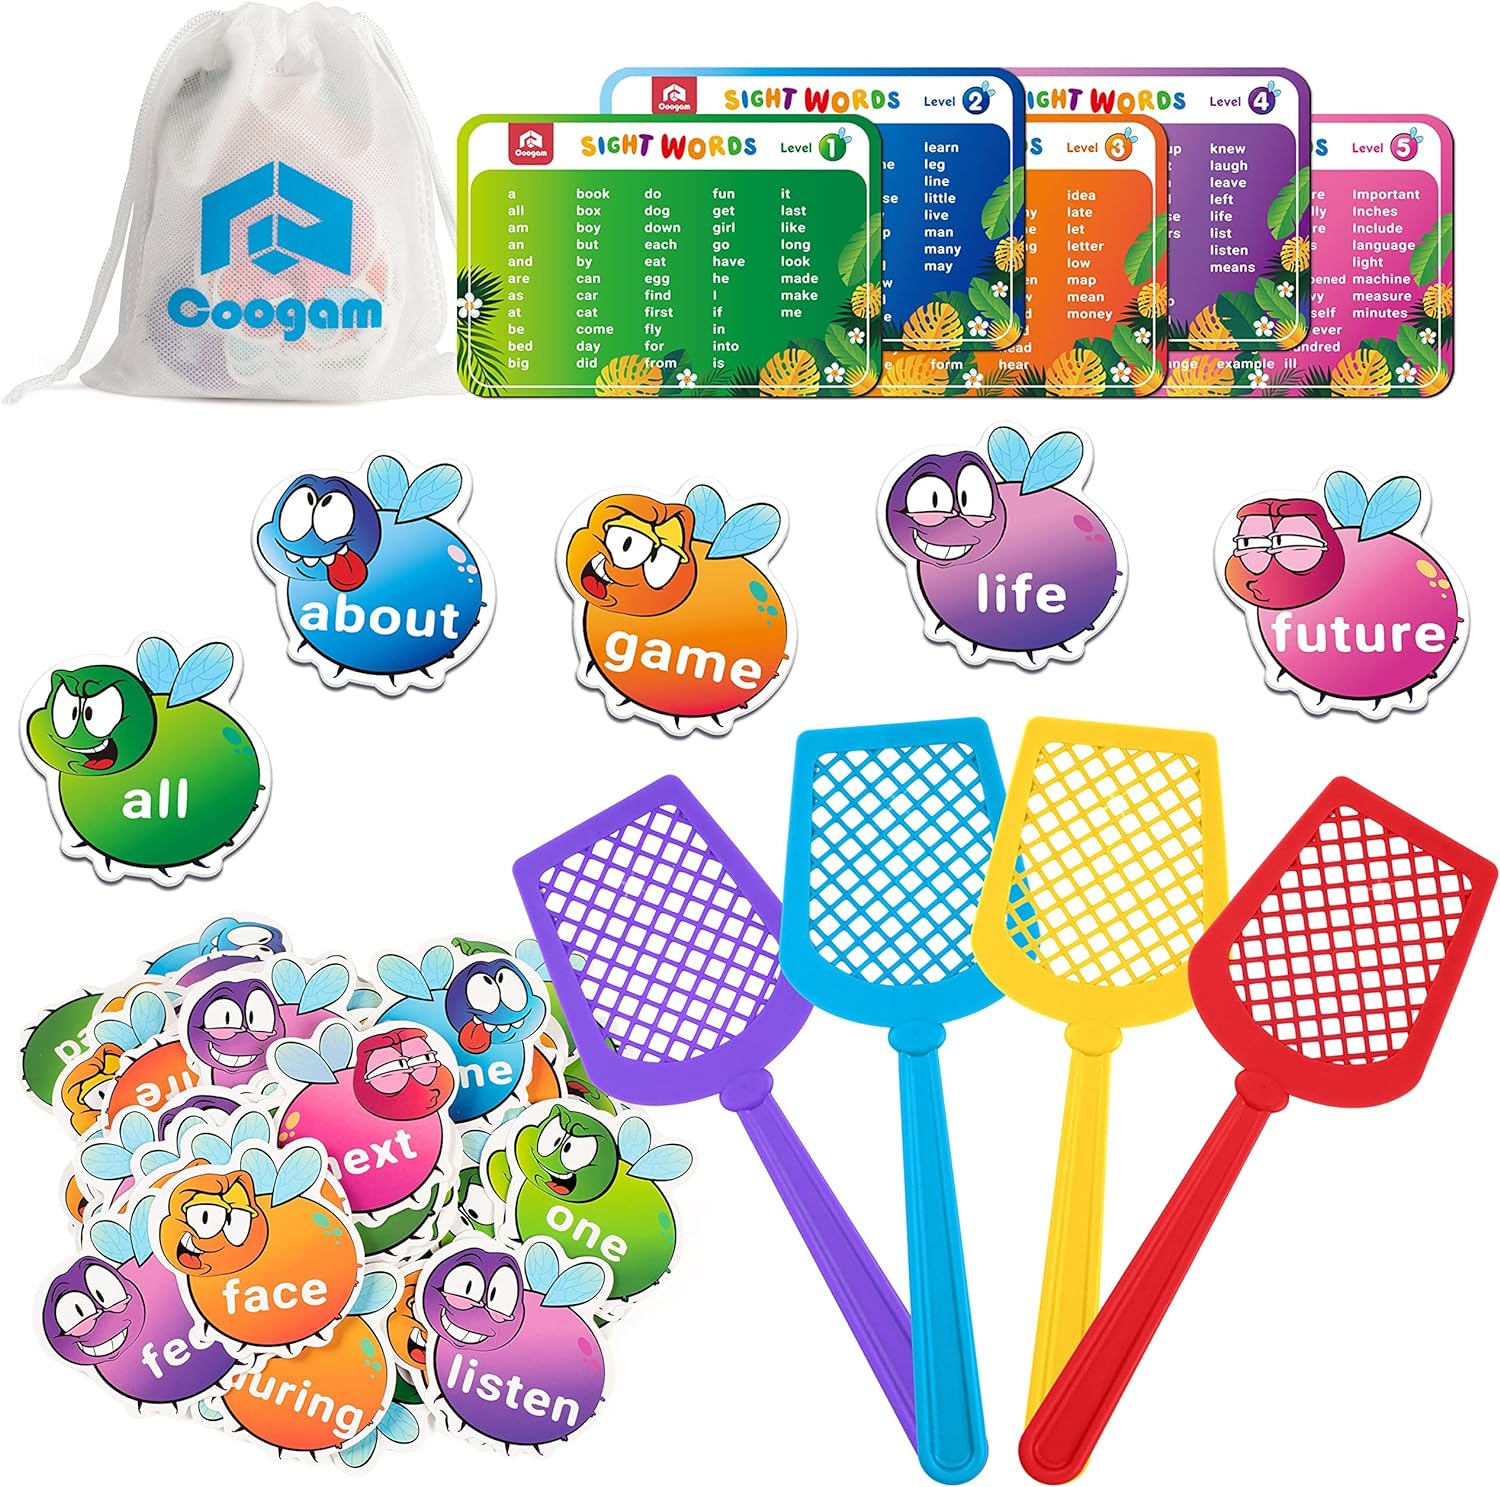 Coogam Sight Words Game with 400 Fry Sight Words and 4 Fly Swatters Set, Dolch Word List Phonics, Literacy Learning Reading Flash Cards Toy Games for Kindergarten,Home School Kids 3 4 5 Year Old